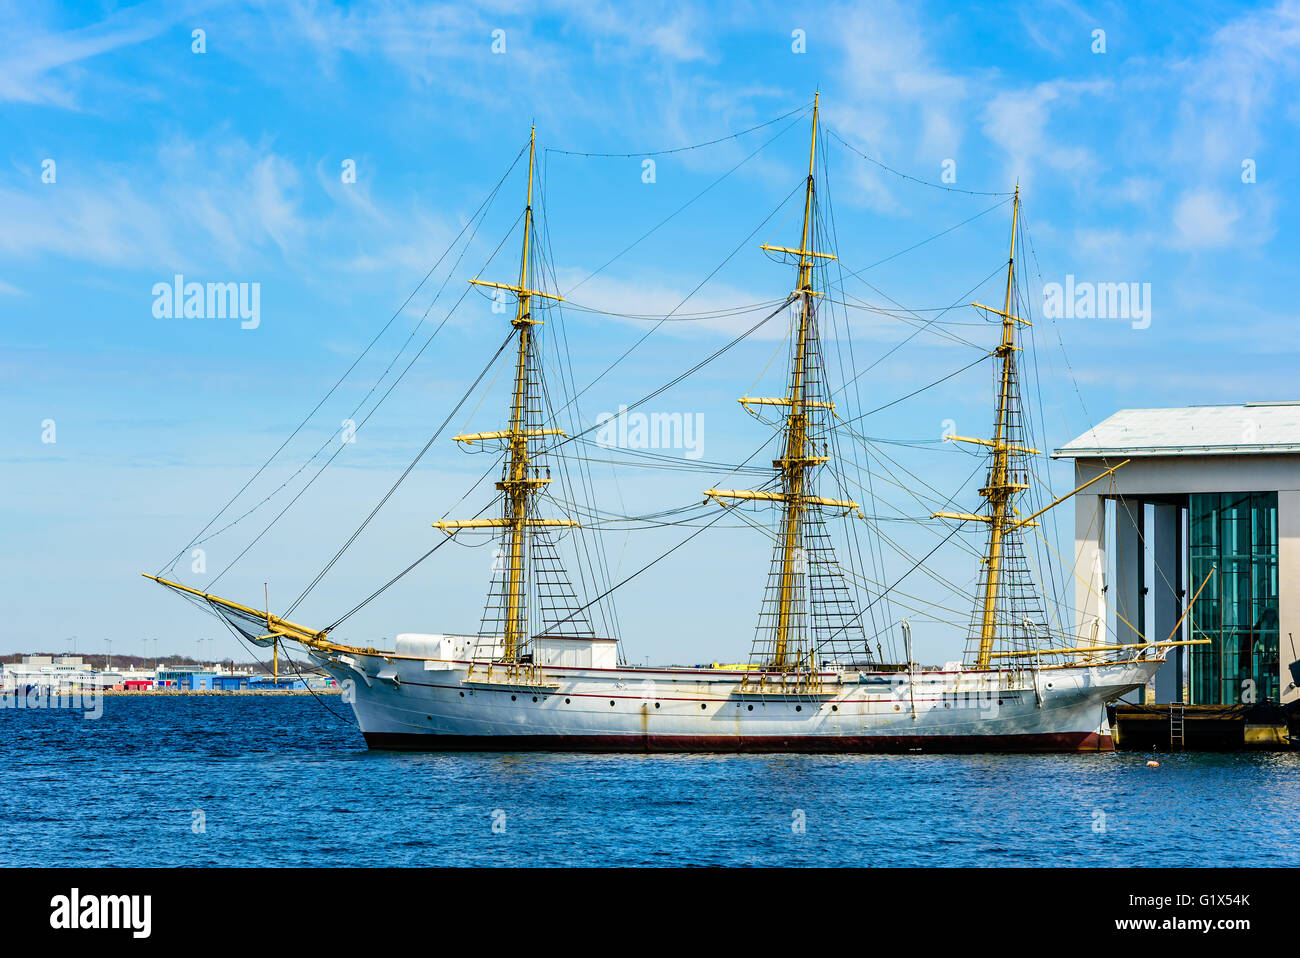 Karlskrona, Sweden - May 3, 2016: HMS Jarramas is one of the smallest fully rigged ships in the world. She is moored outside the Stock Photo